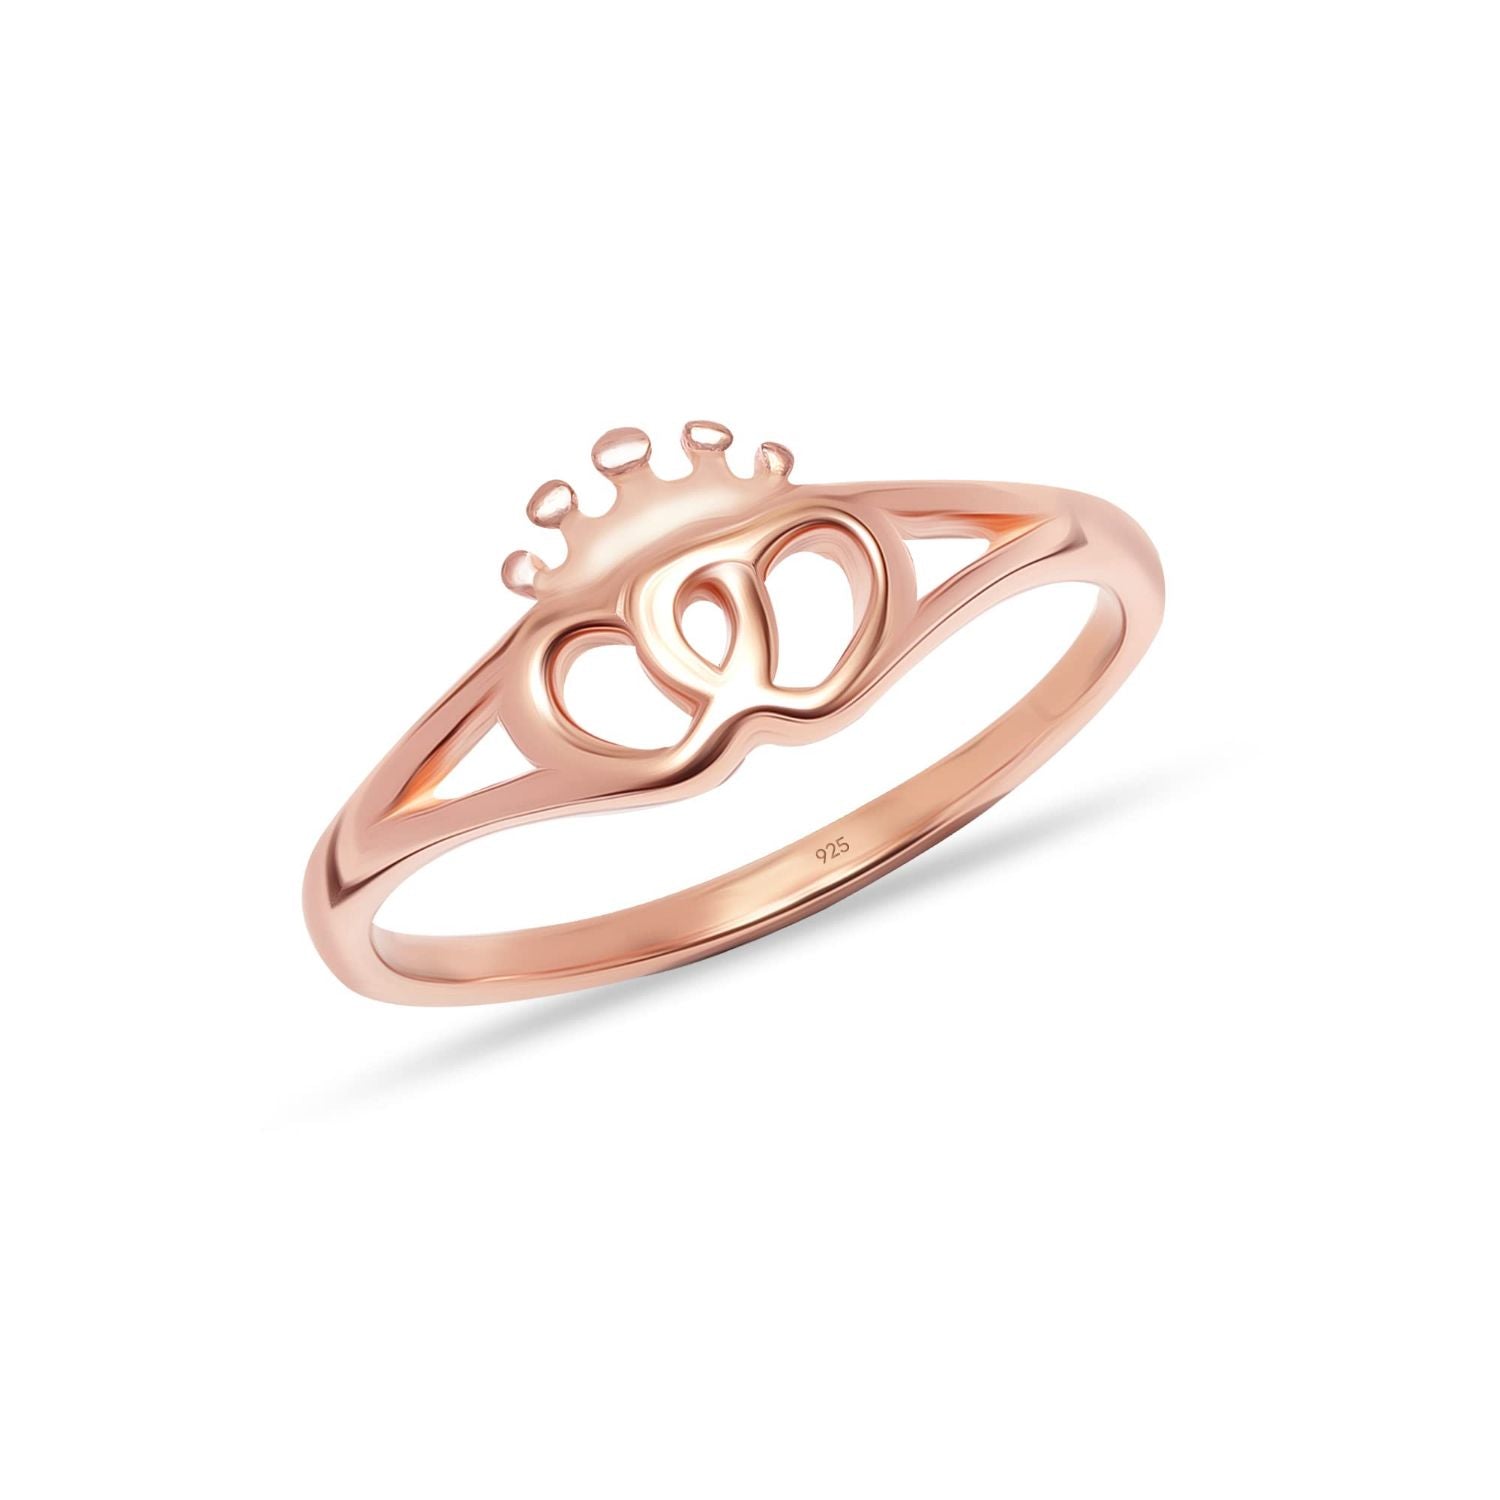 925 Sterling Silver Rose Gold-Plated Crown & Interwined Hearts Wedding Band Rings for Women Teen